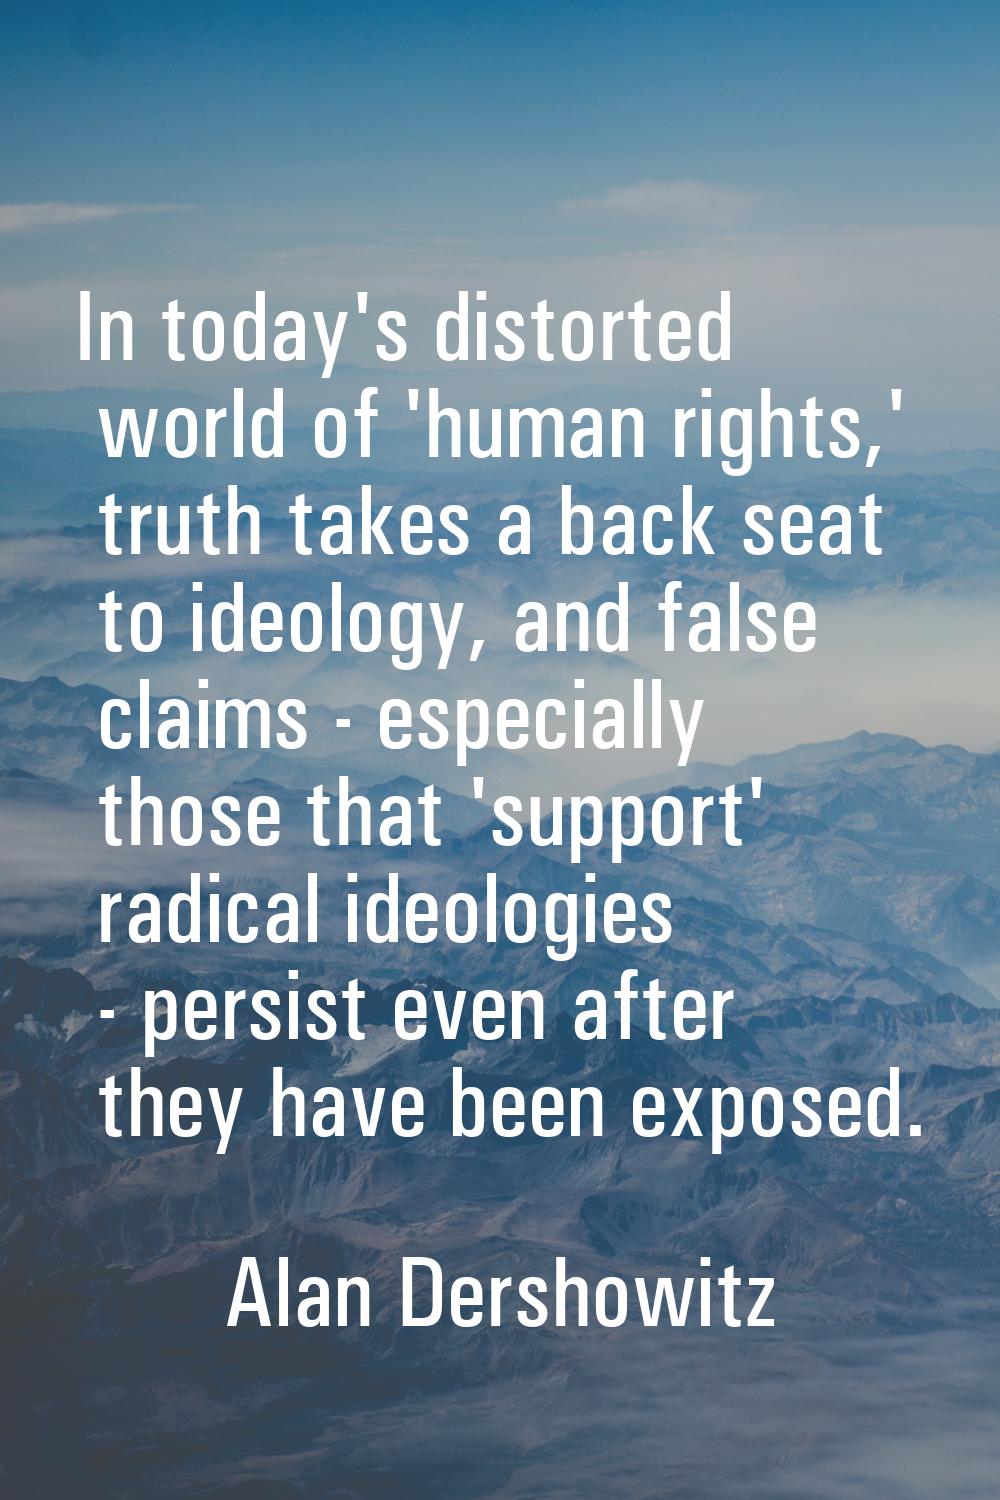 In today's distorted world of 'human rights,' truth takes a back seat to ideology, and false claims